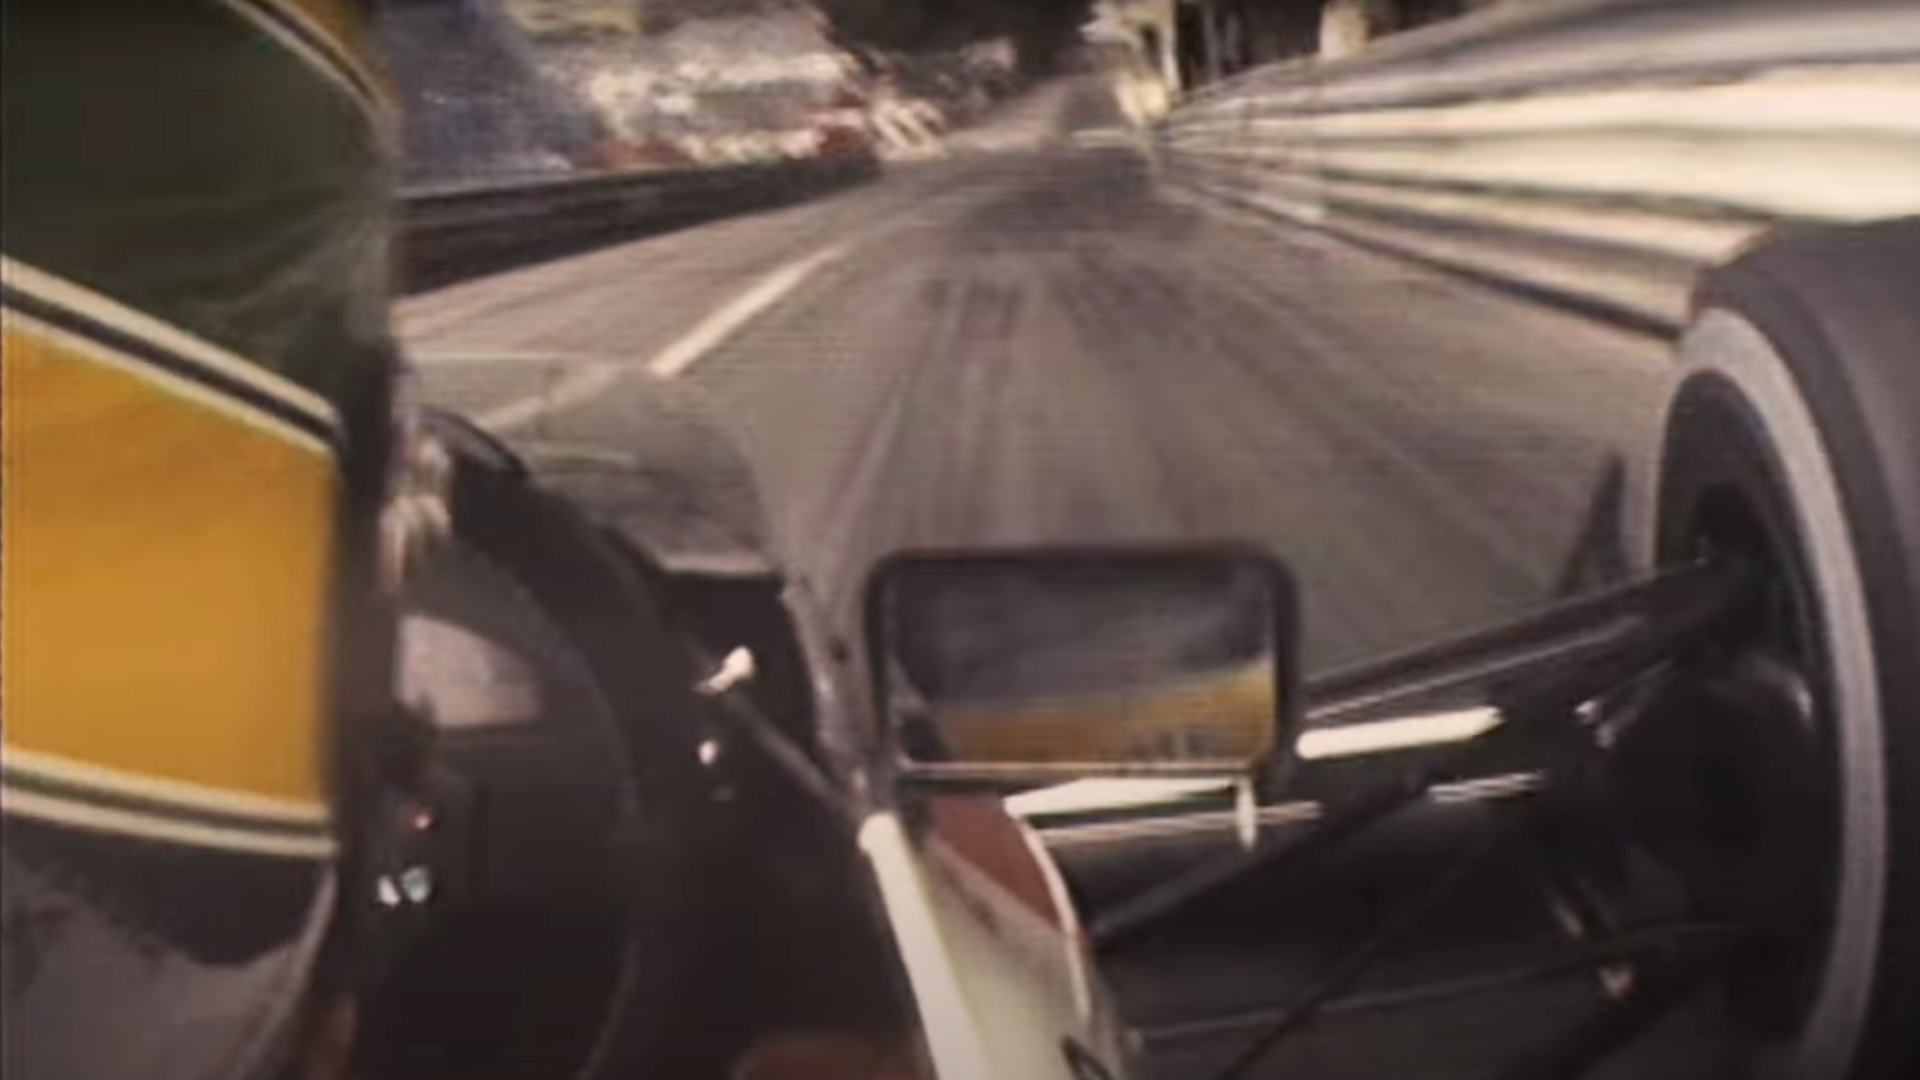 Remastered, 60 FPS Onboard Video of Senna at 1990 Monaco GP Shows an F1 Legend At Work